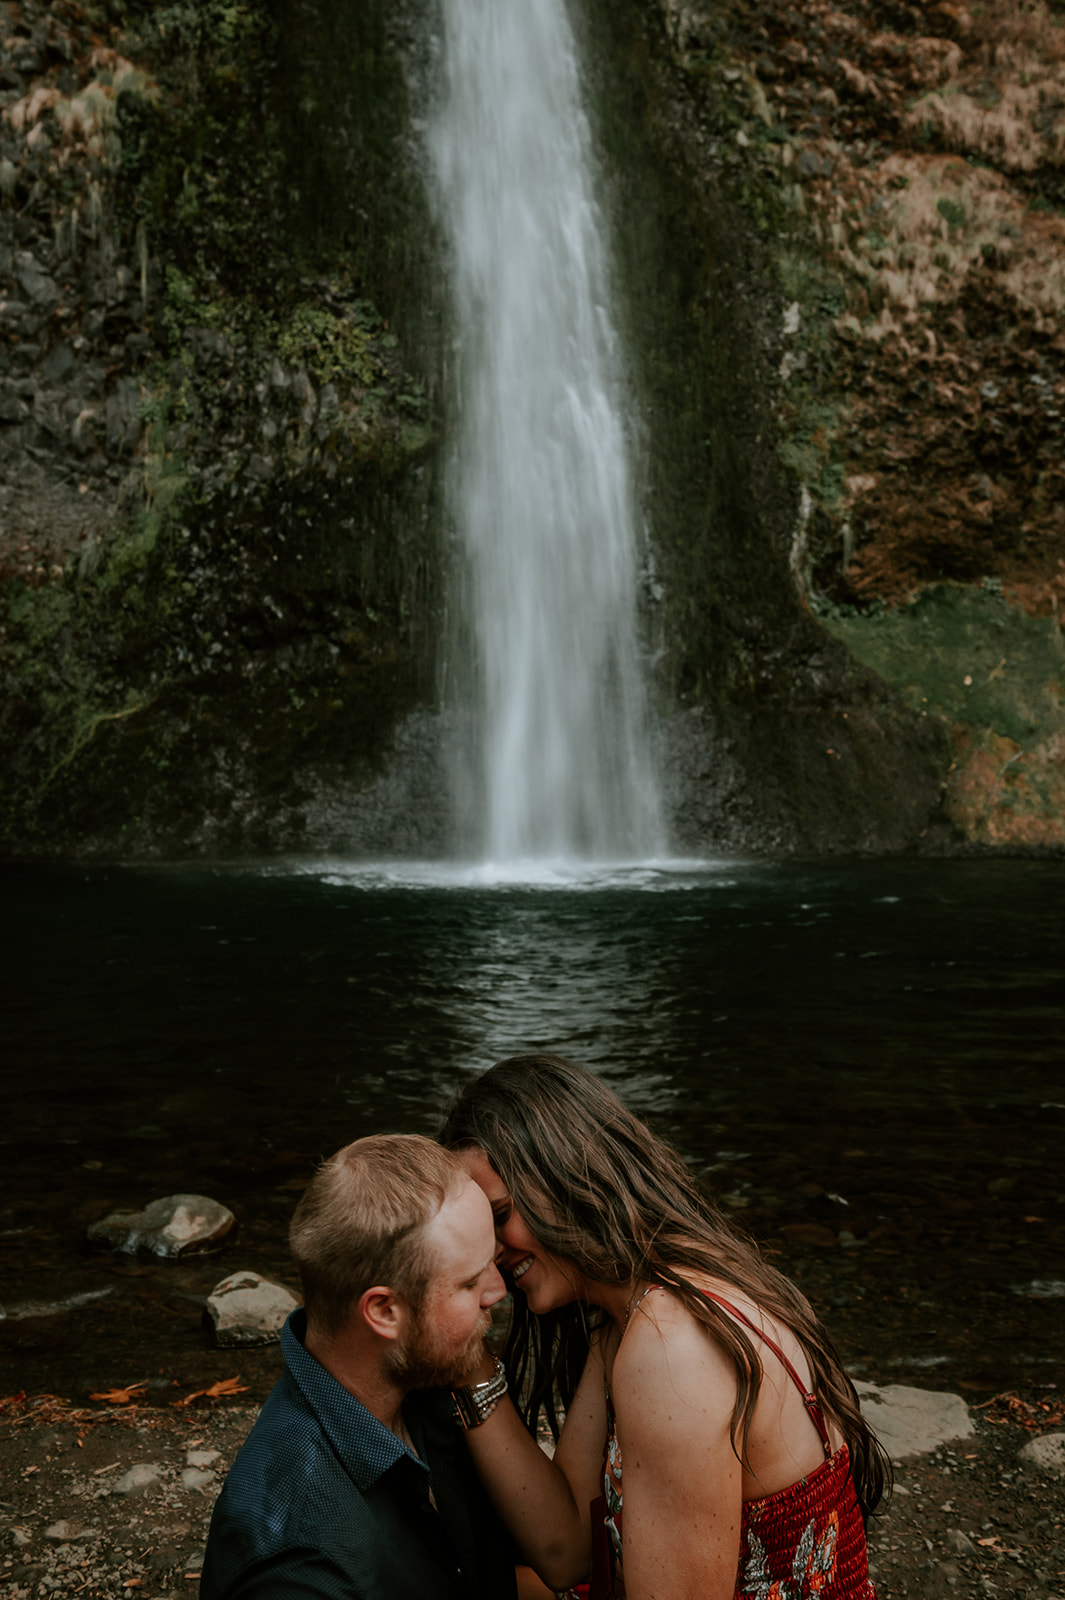 Couple kissing at the base of horsetail falls for their engagement photos